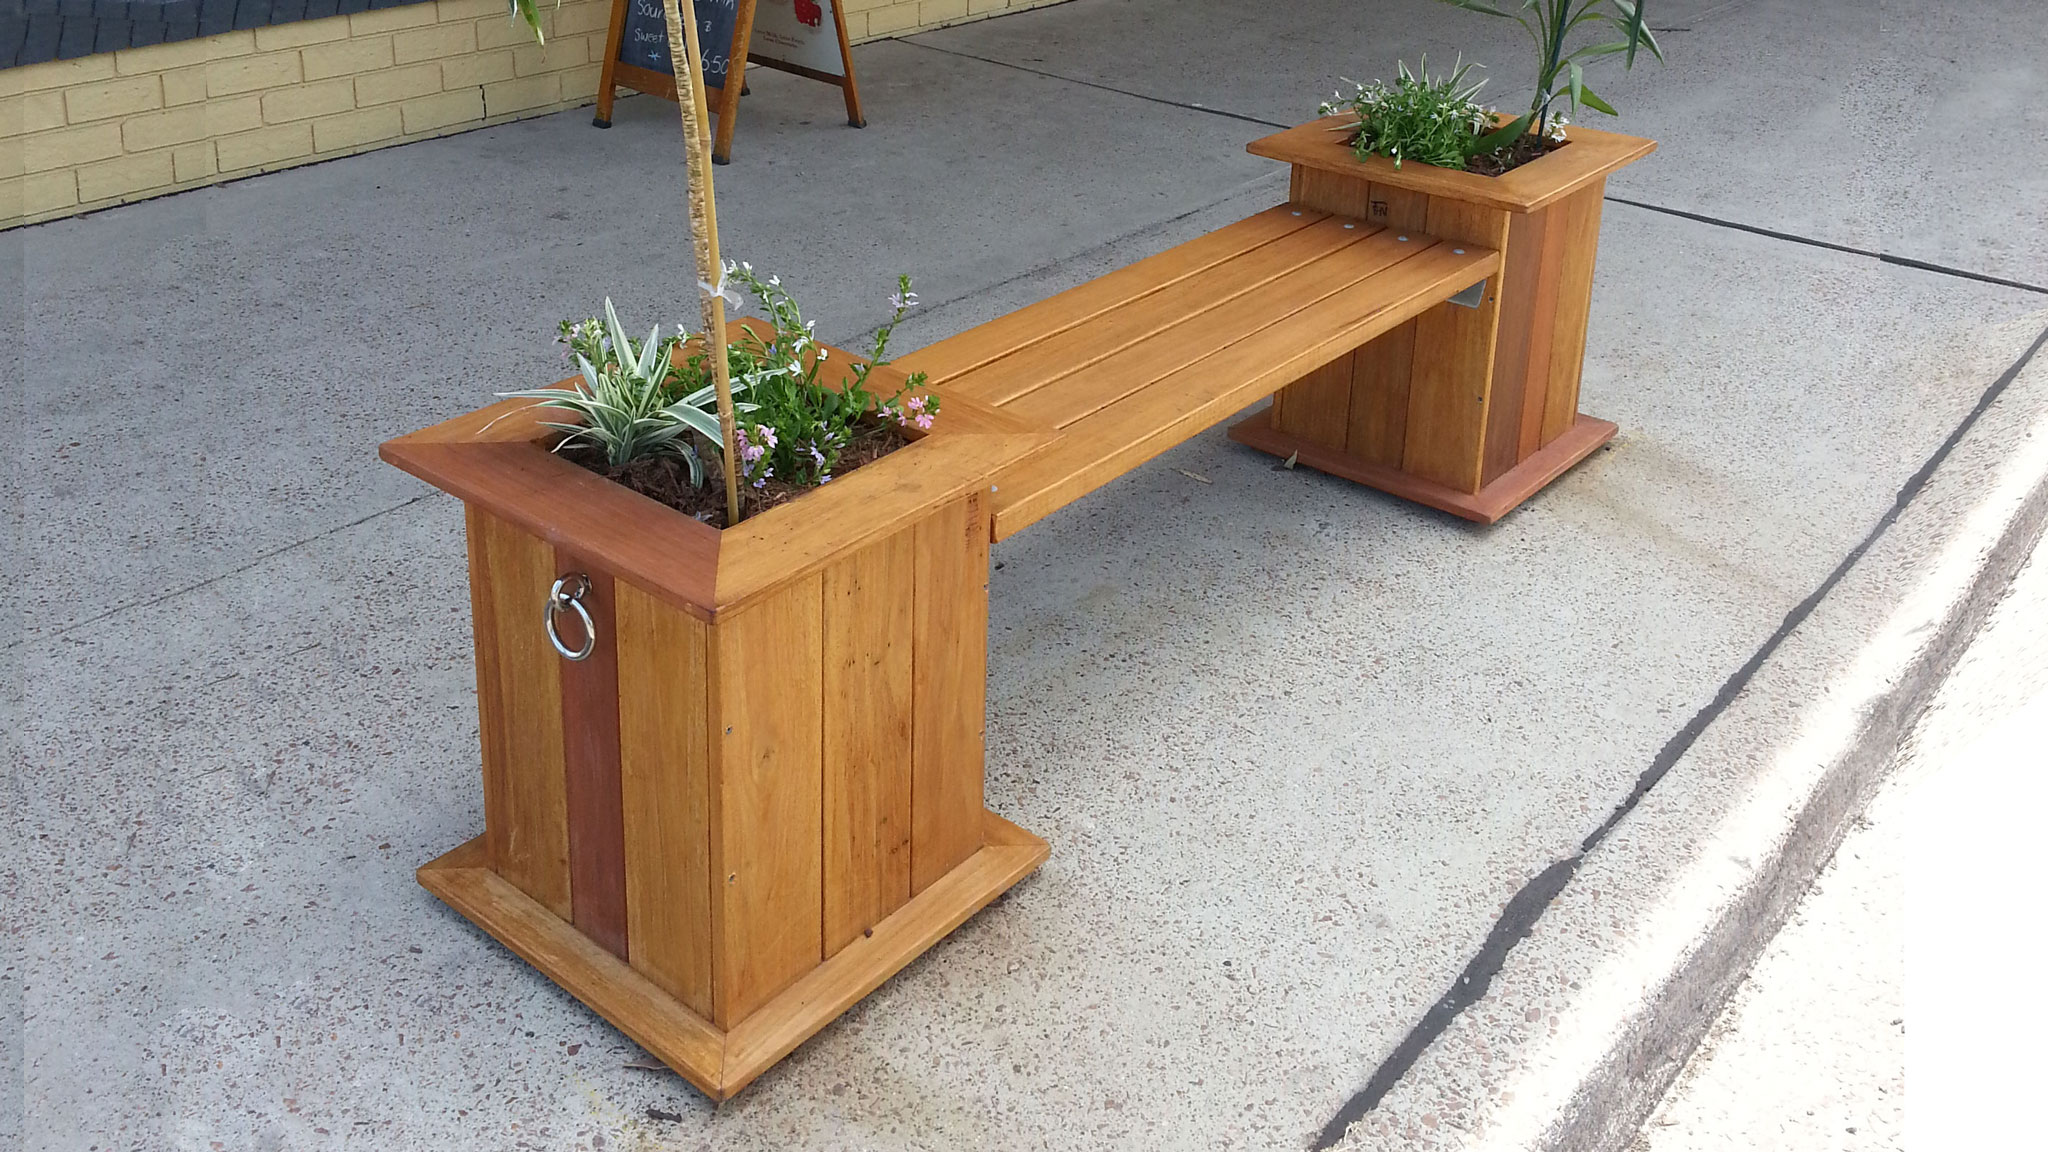 Photo showing a planter box bench built by the shed